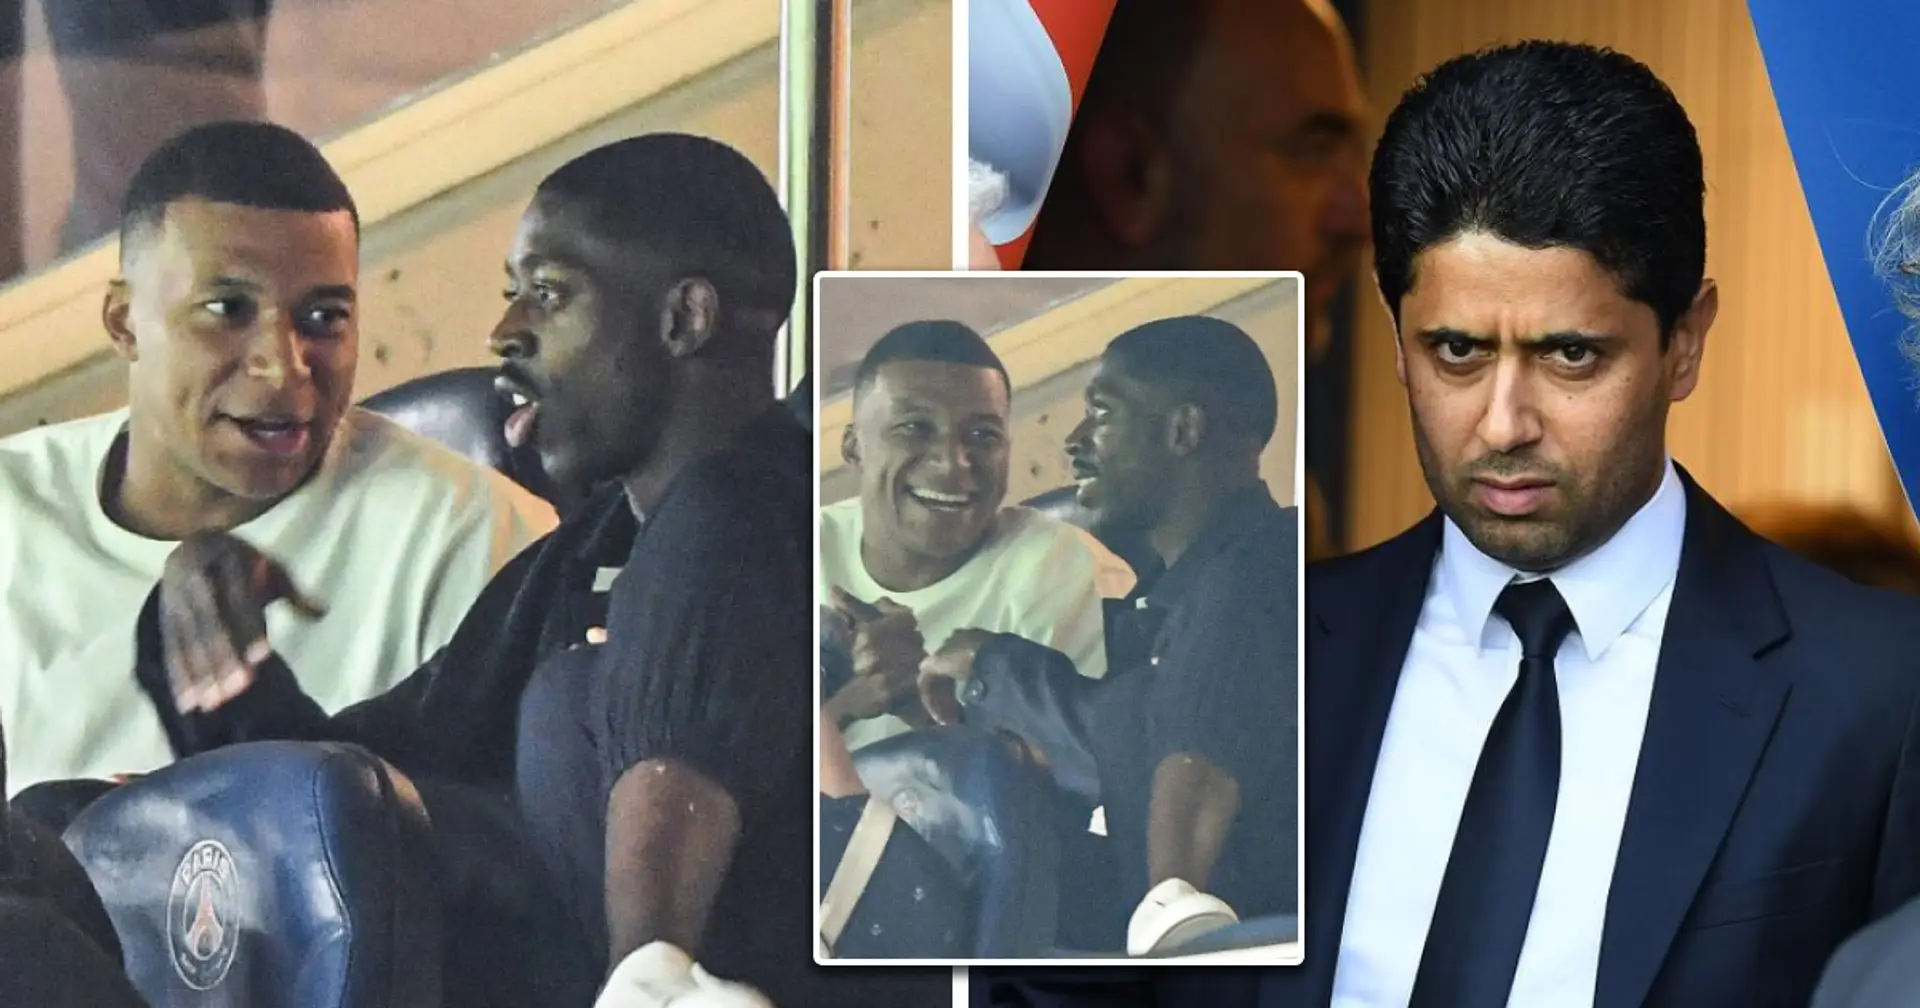 Kylian Mbappe and Ousmane Dembele spotted laughing in the stands during club's goalless draw with Lorient